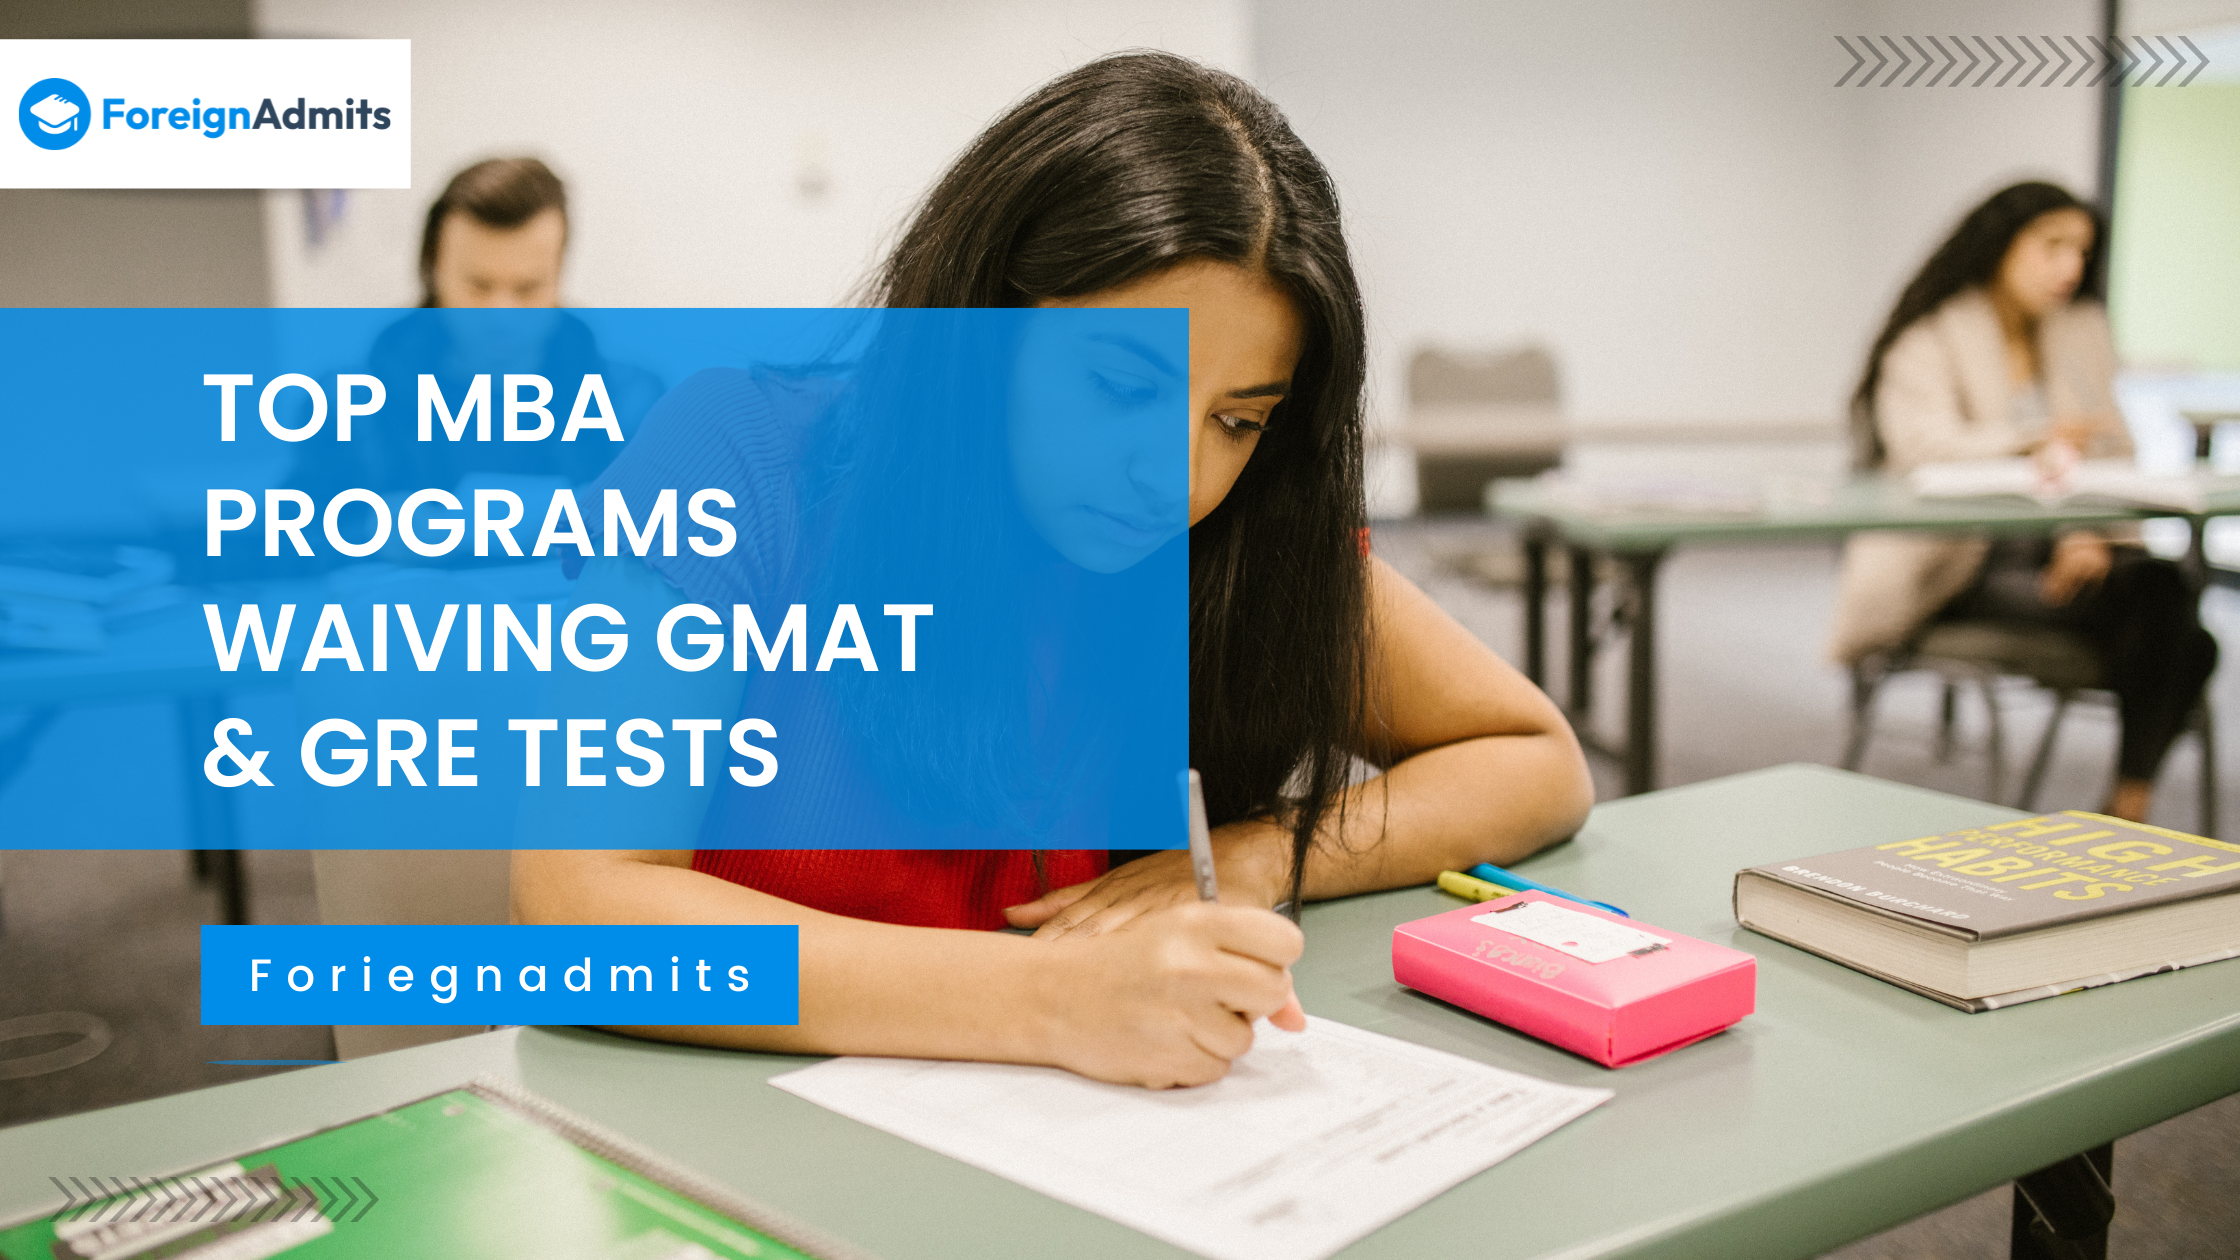 Top MBA Programs Waiving GMAT & GRE Tests